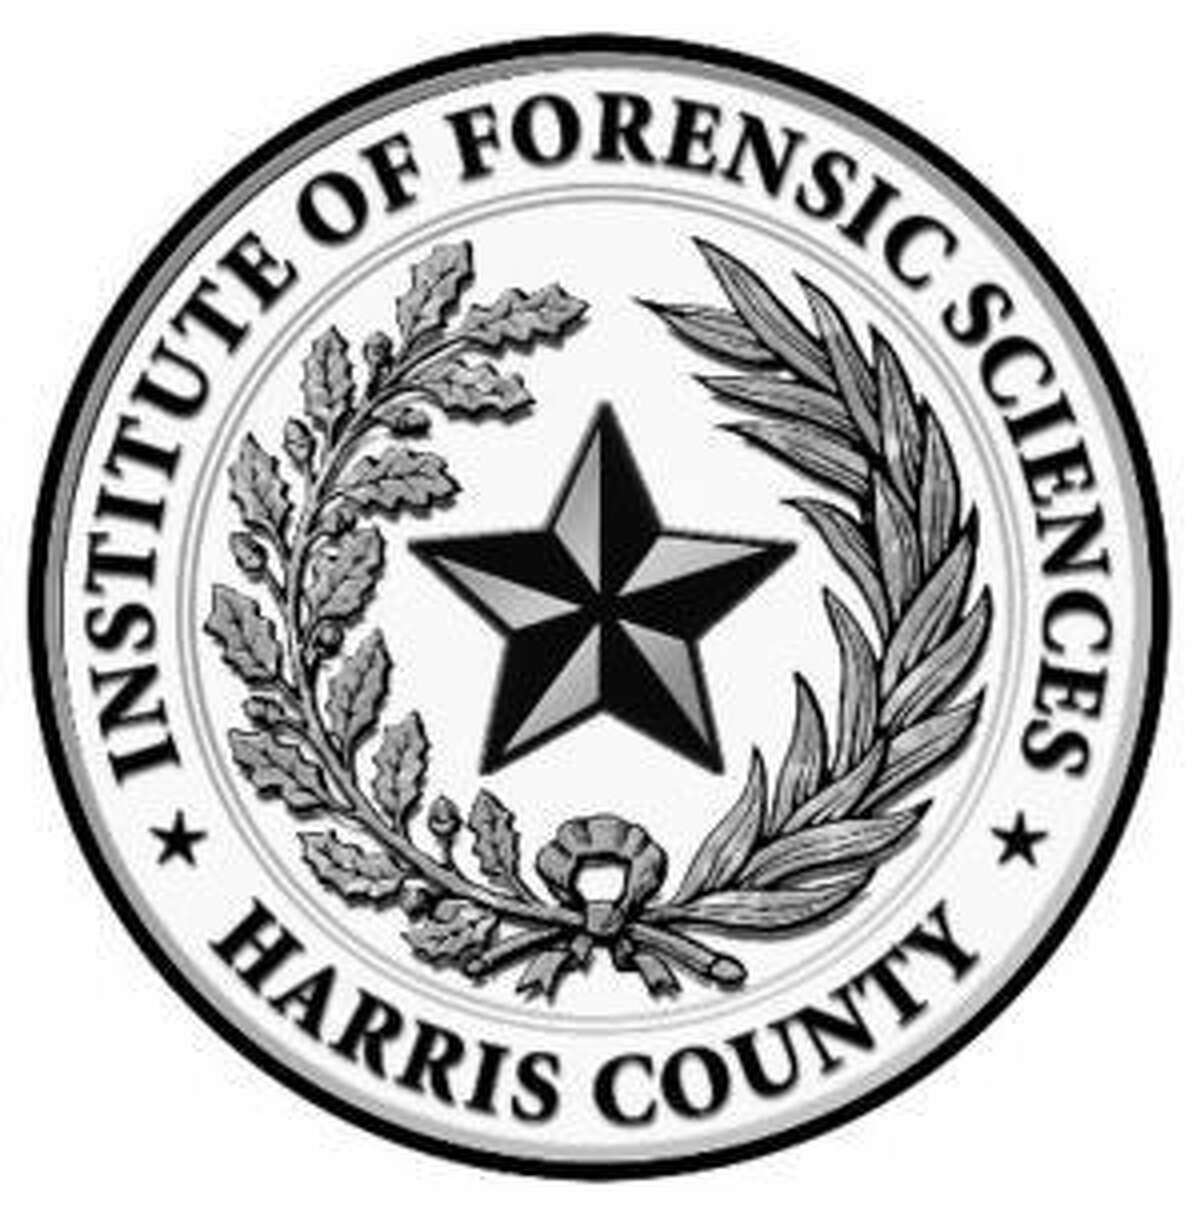 The Harris County Institute of Forensic Sciences requests the public’s assistance in locating next of kin for the following deceased individuals.